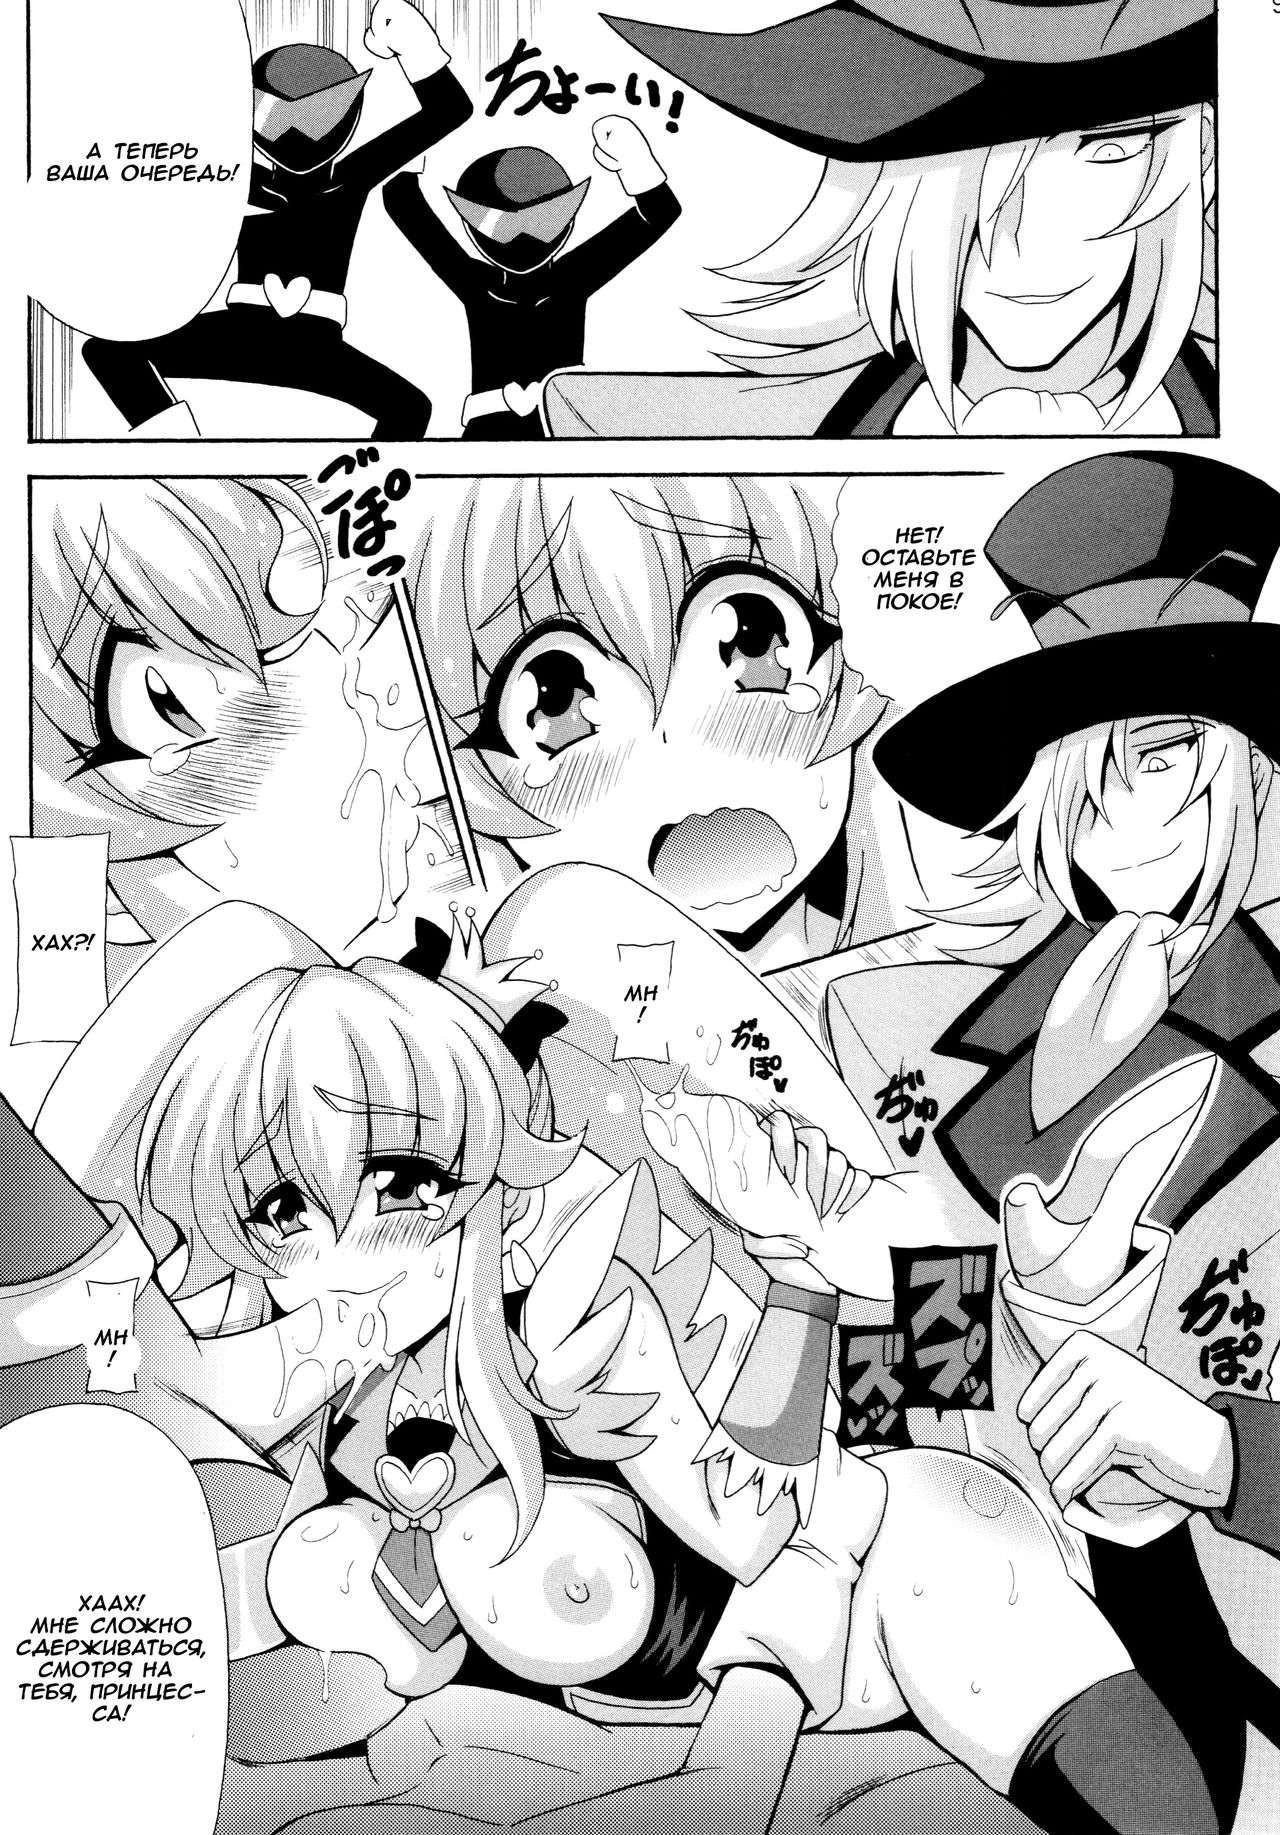 (COMIC1☆8) [Leaz Koubou (Oujano Kaze)] THE WEAKEST-PRINCESS (HappinessCharge Precure!) [Russian] [Witcher000] (COMIC1☆8) [りーず工房 (王者之風)] THE☆WEAKEST-PRINCESS (ハピネスチャージプリキュア！) [ロシア翻訳]